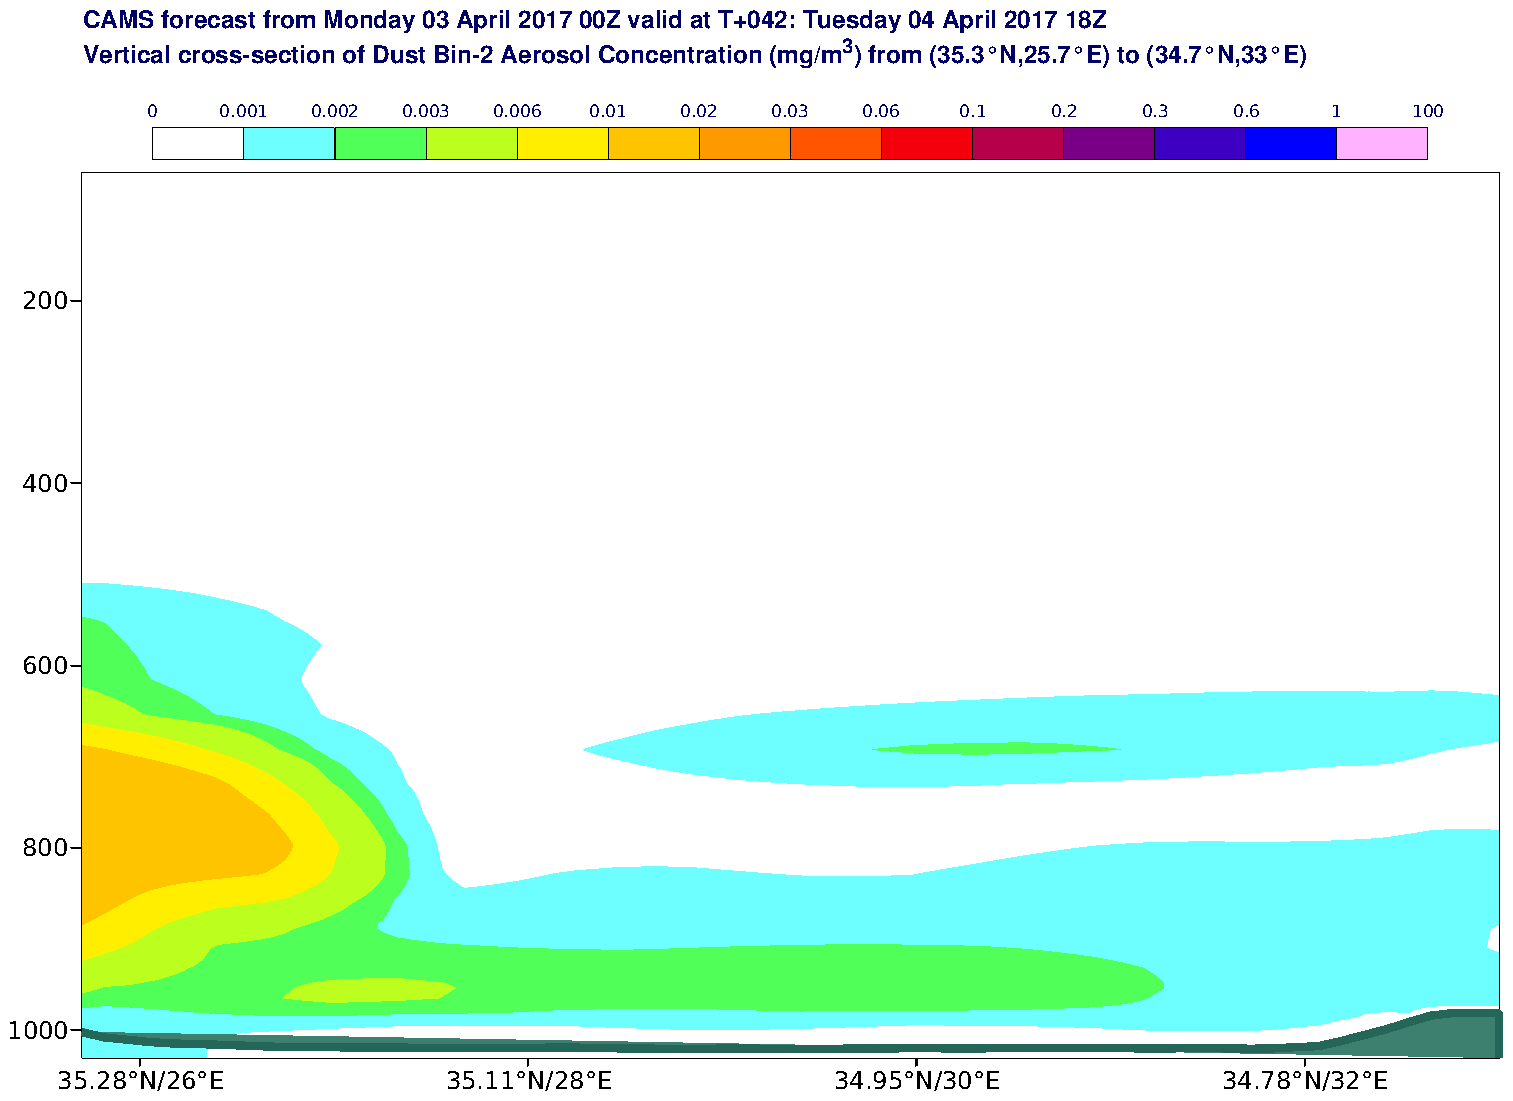 Vertical cross-section of Dust Bin-2 Aerosol Concentration (mg/m3) valid at T42 - 2017-04-04 18:00